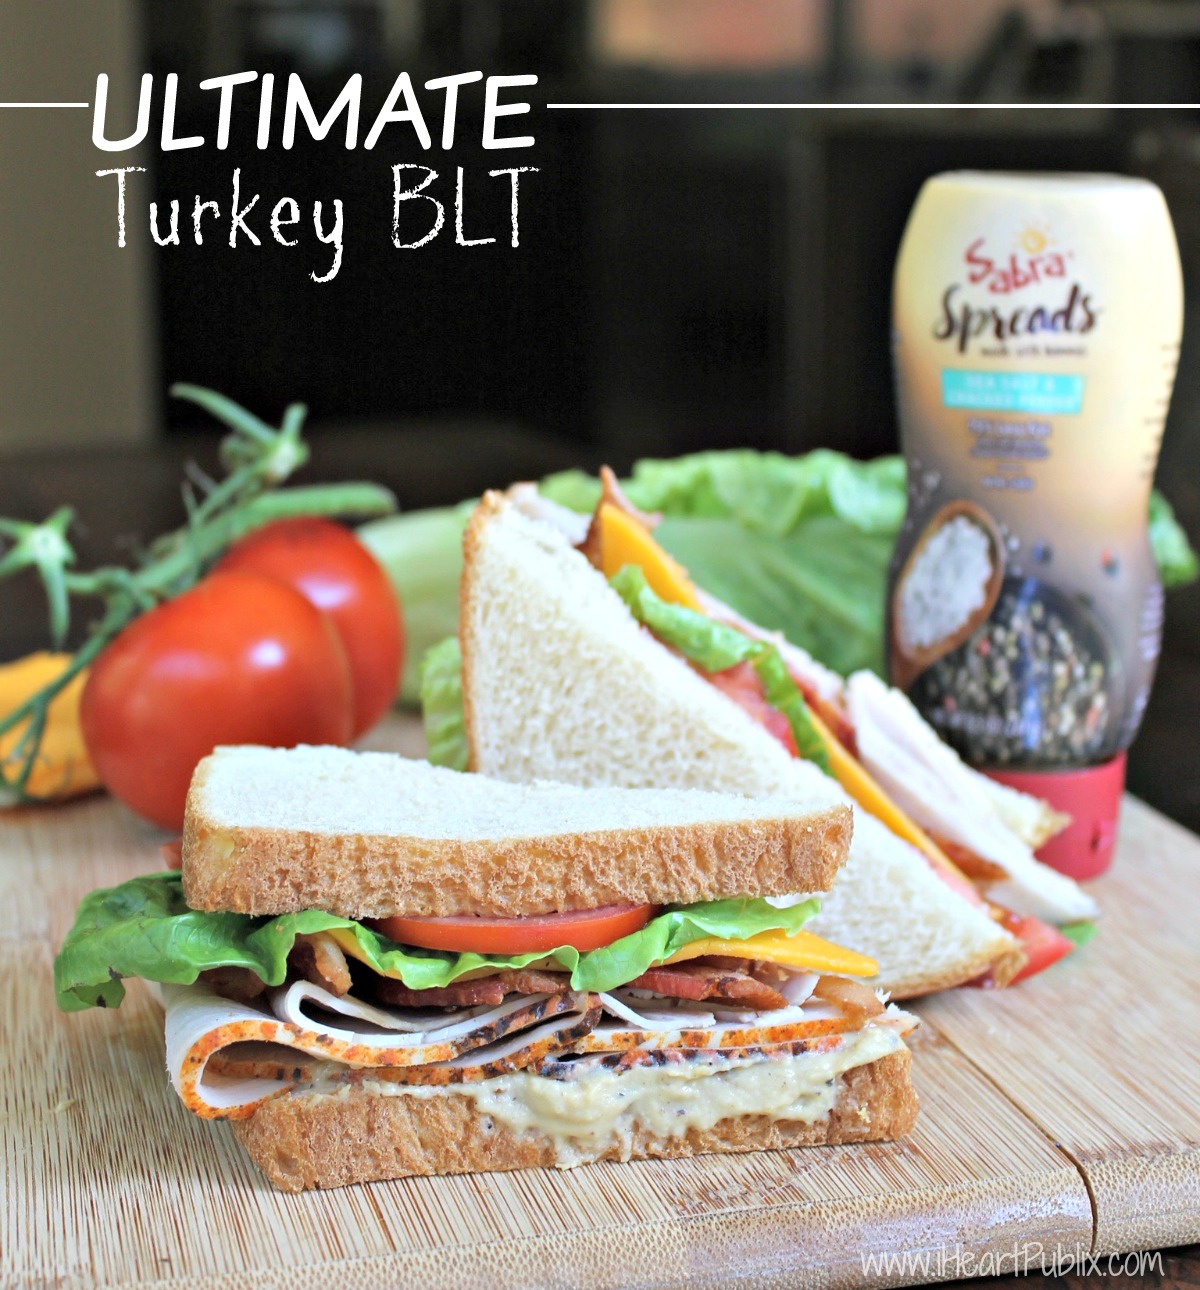 Ultimate Turkey Blt Made With New Sabra Spreads